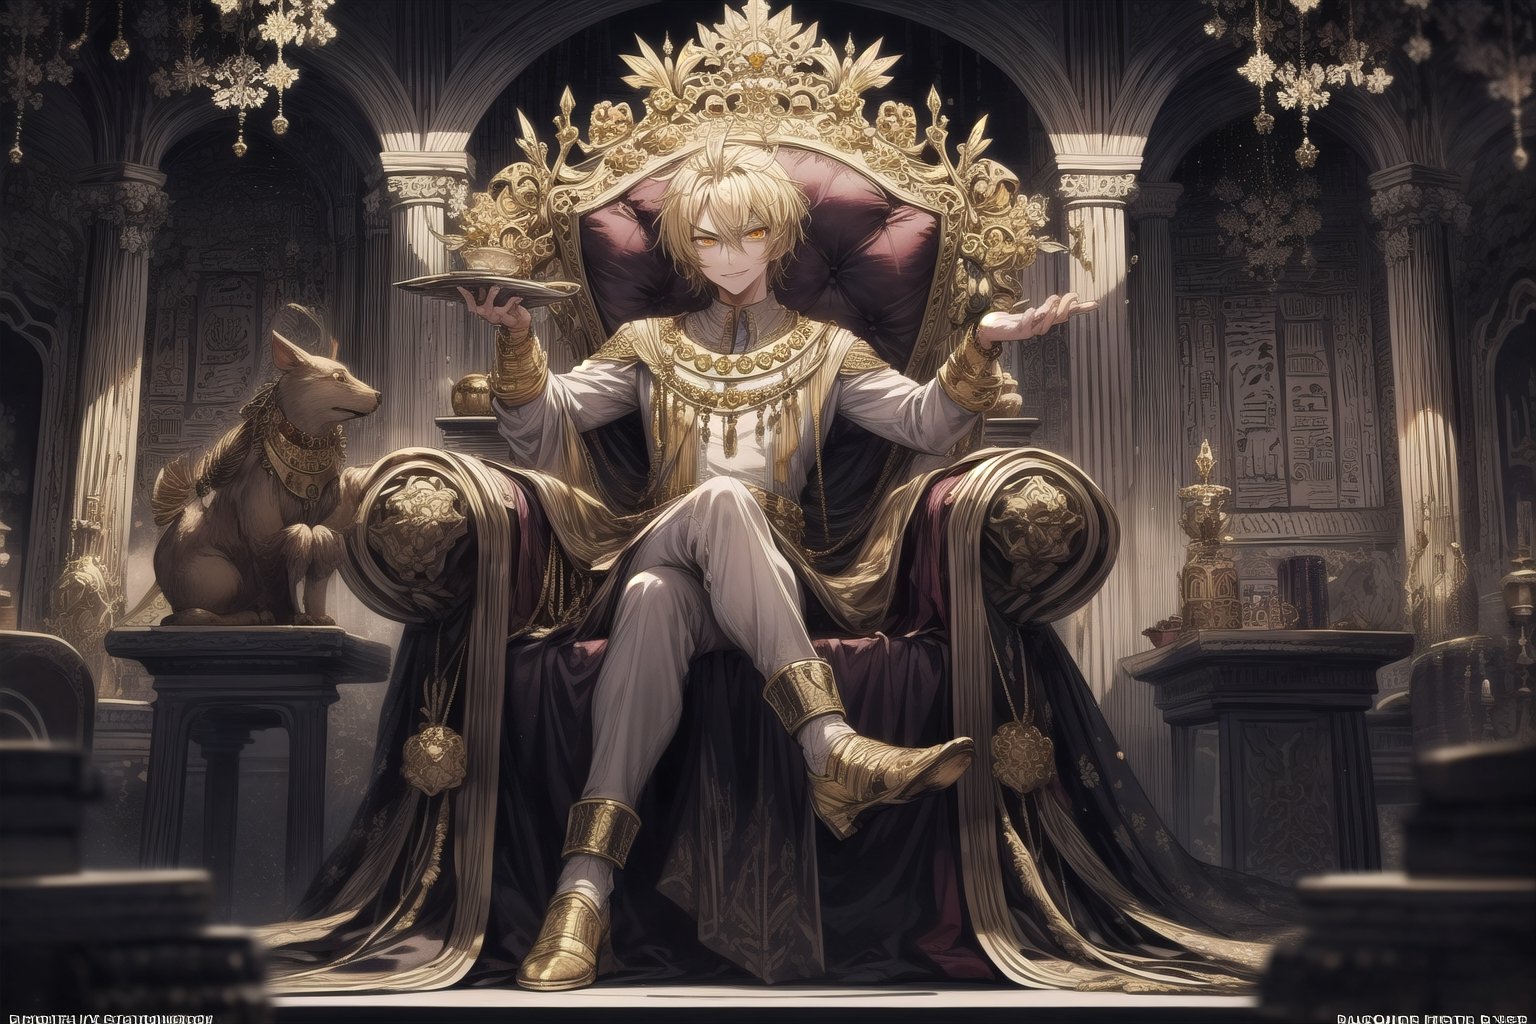 1 man, golden eyes, smile and arrogant look, short hair, blonde hair combed back, looks great, wears a pharaoh costume with jewels, sitting on his throne, DArt
